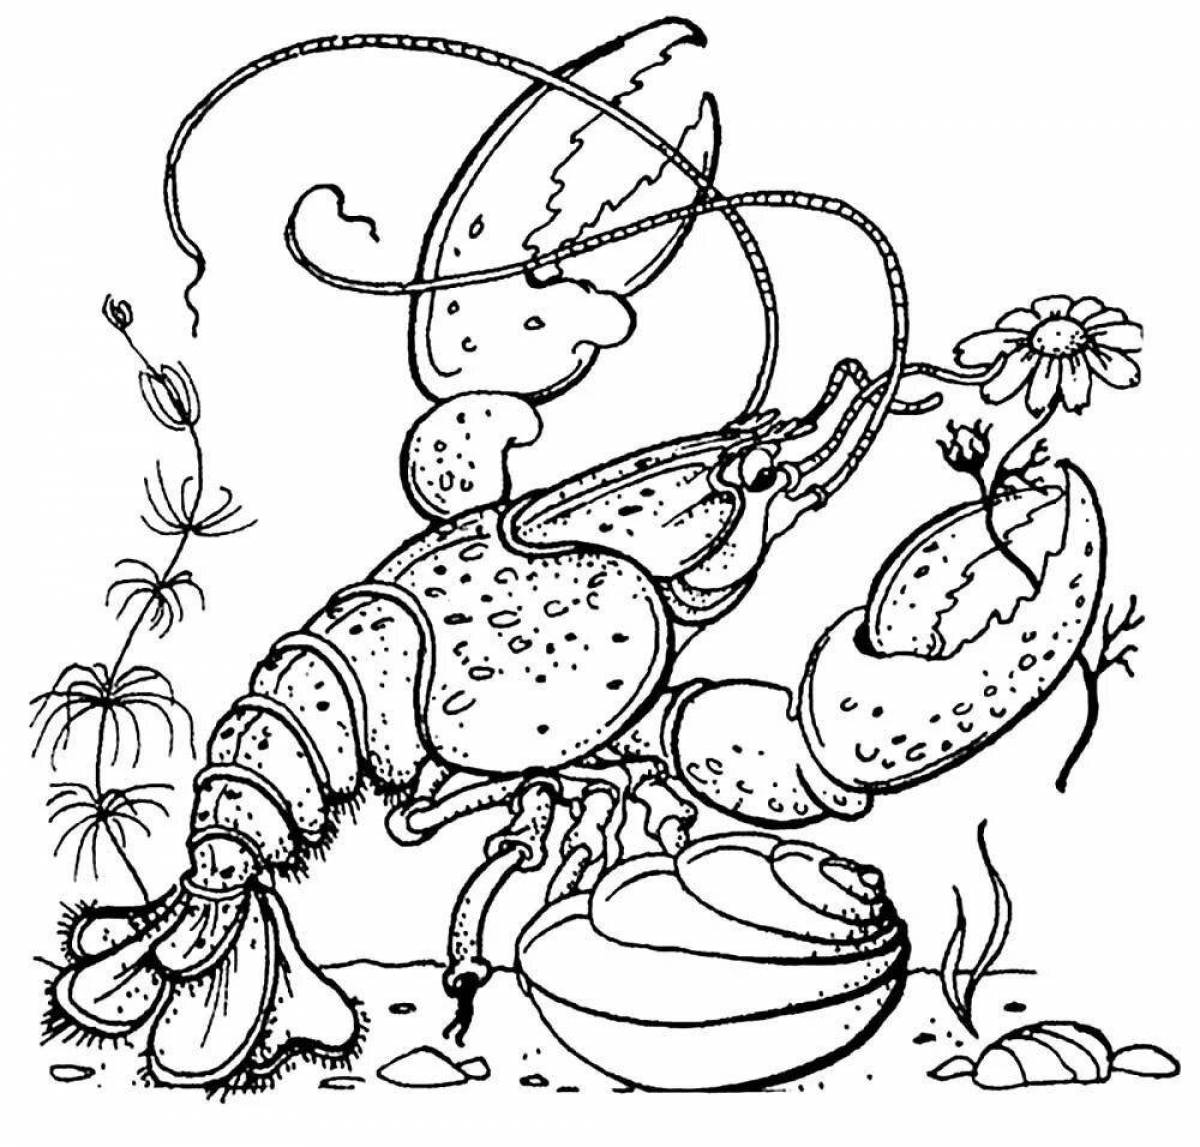 Playful cancer coloring page for kids